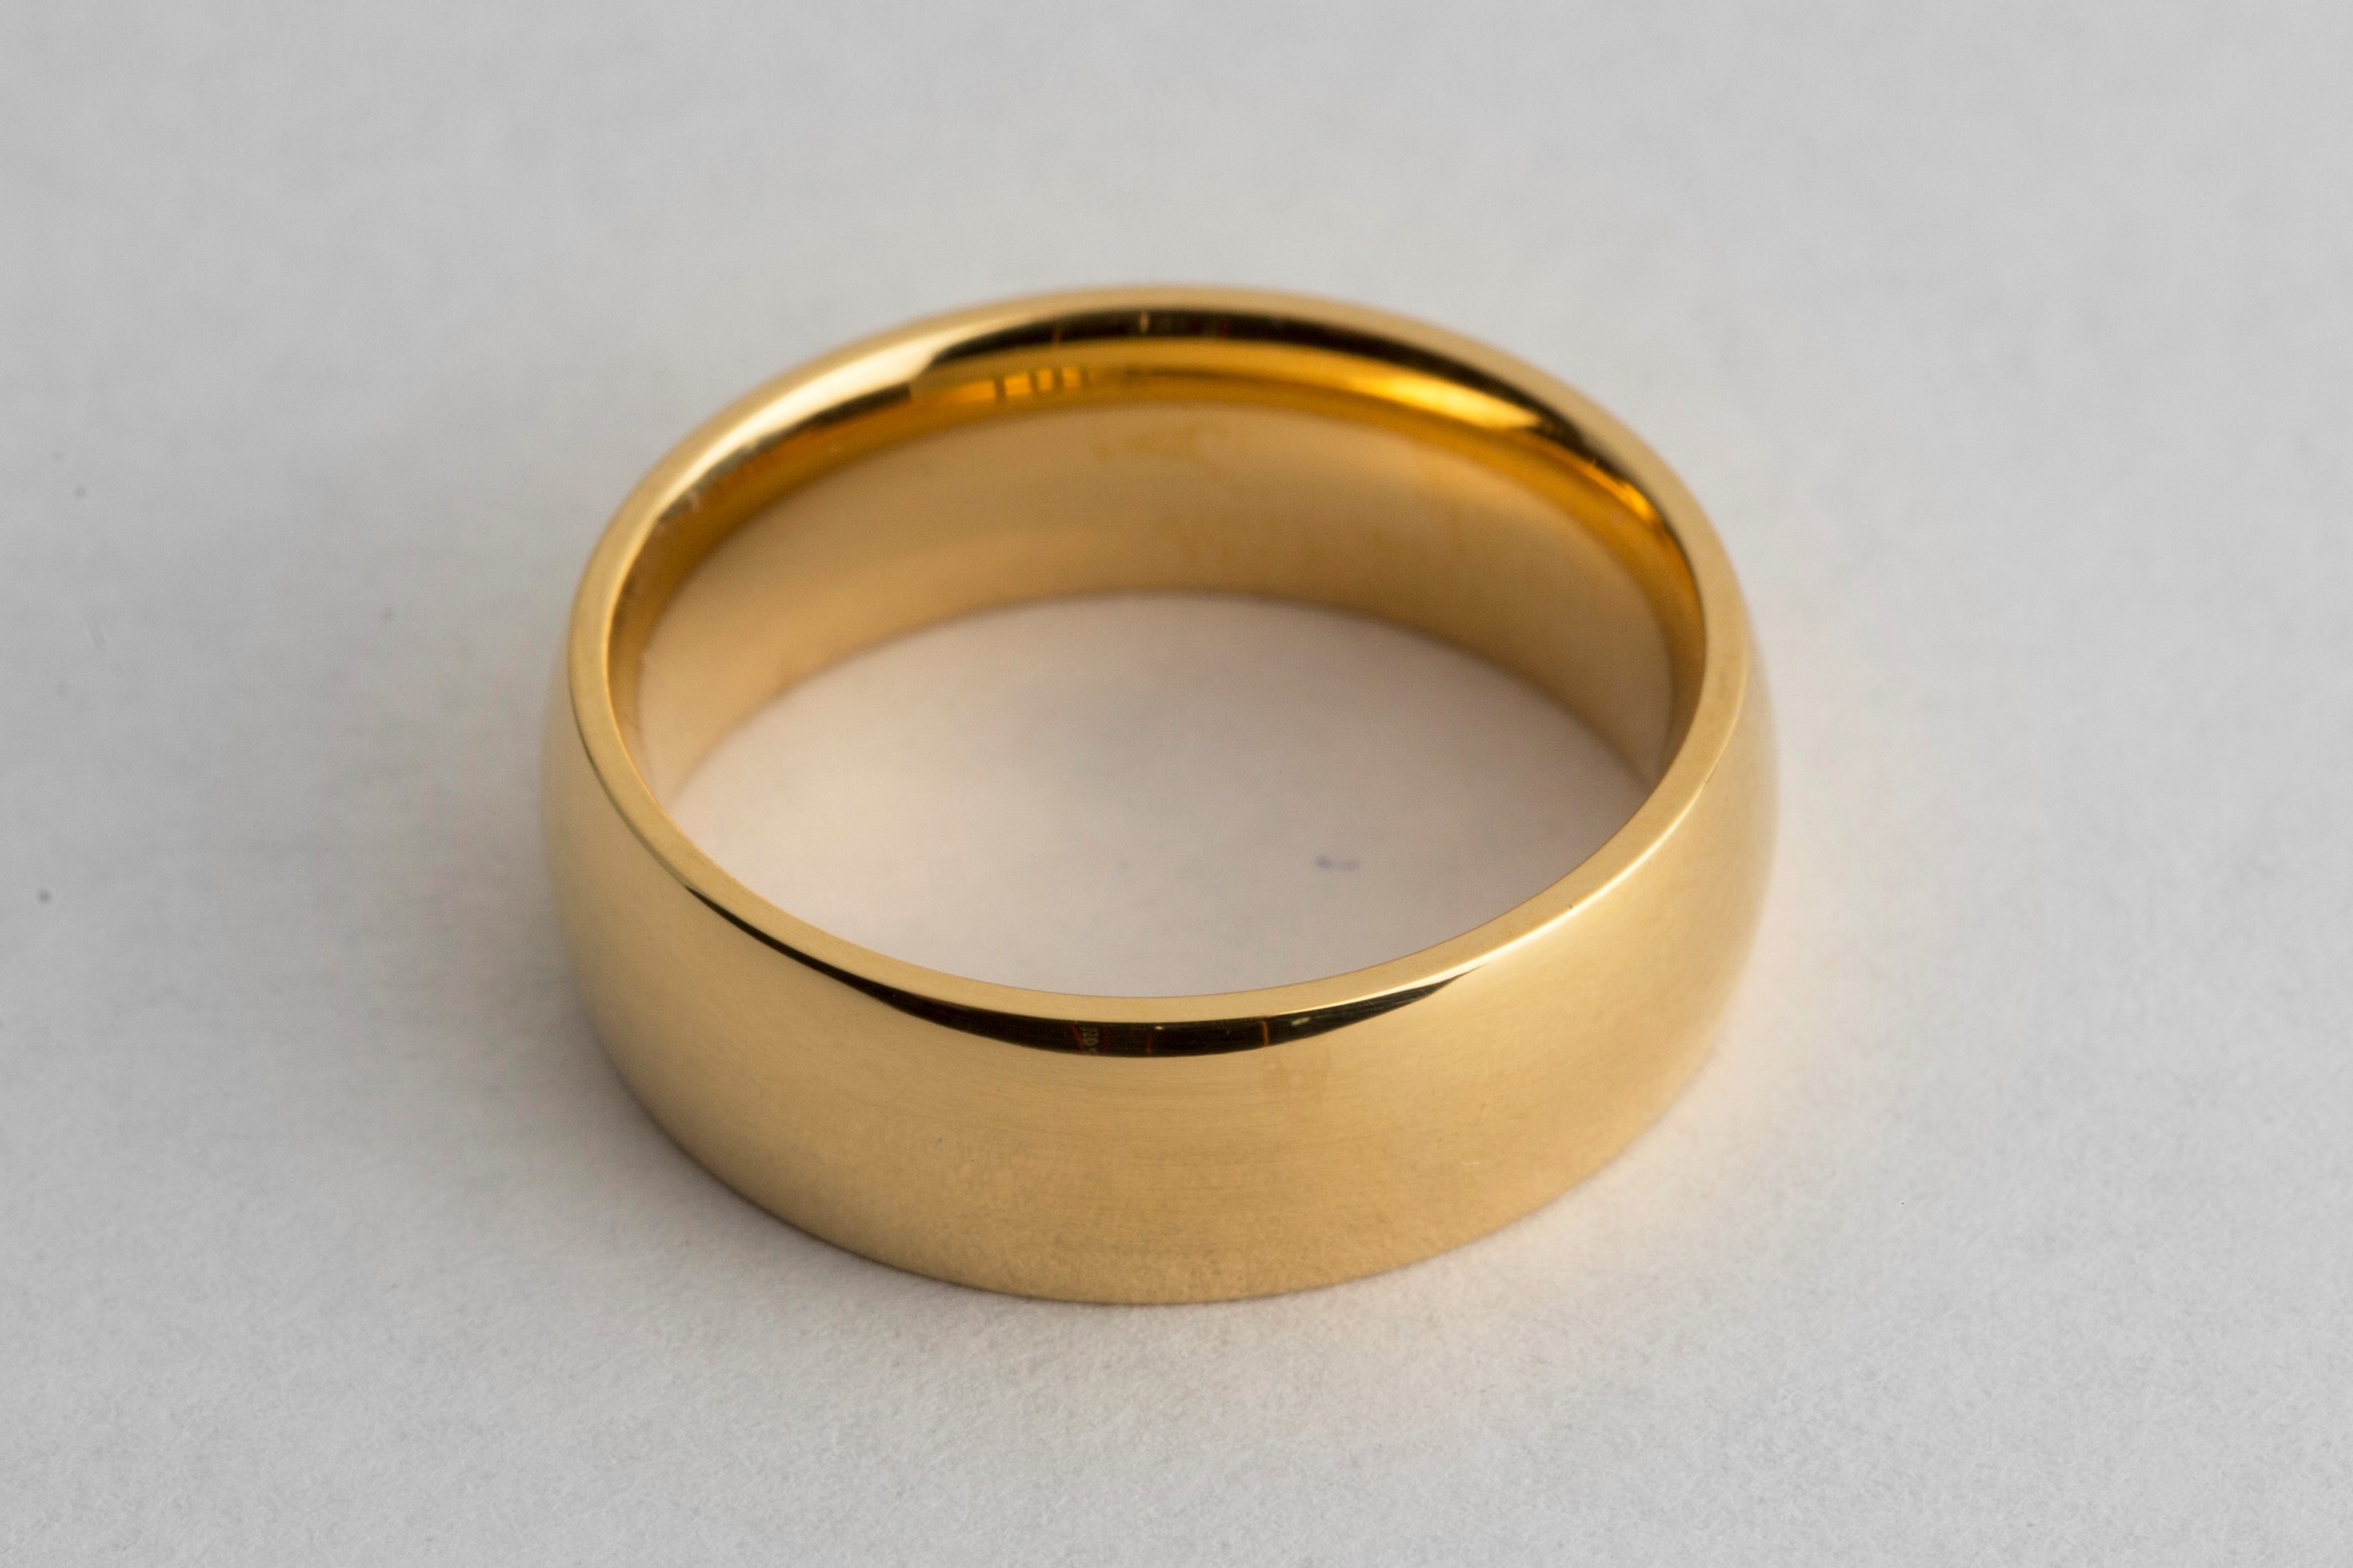 24k gold plated wedding band